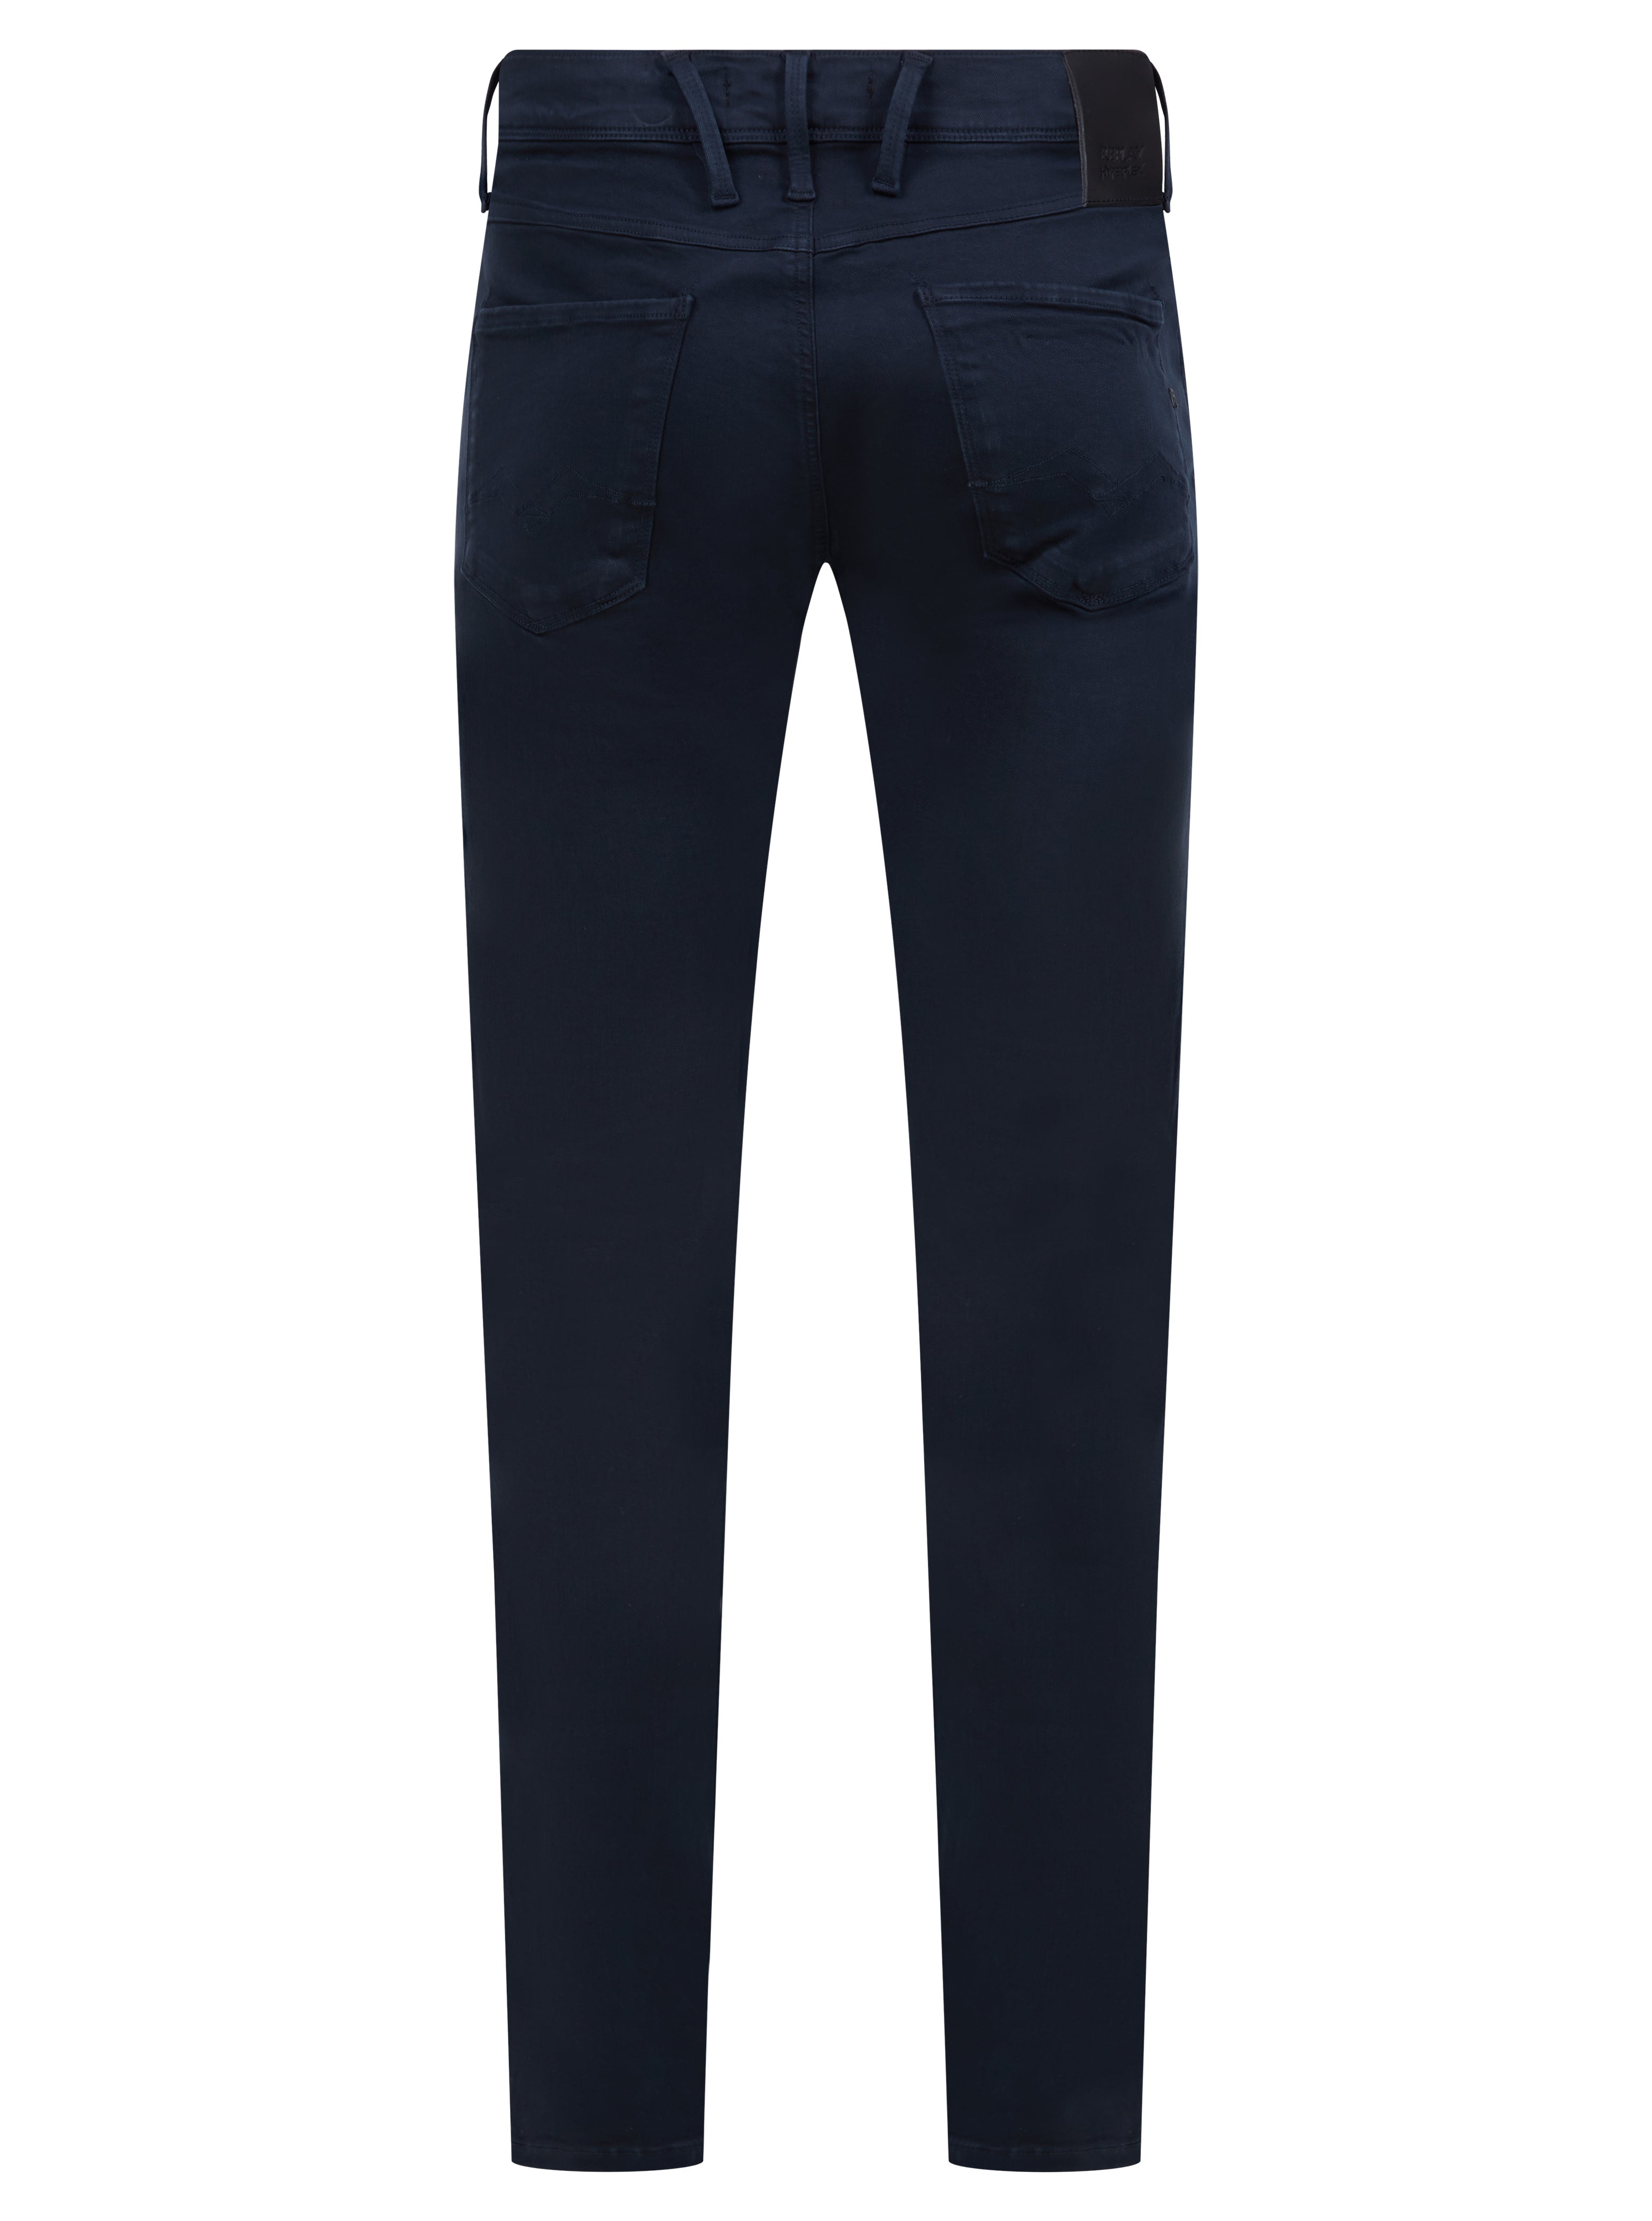 Load image into Gallery viewer, Replay Hyperflex Anbass Jean Navy
